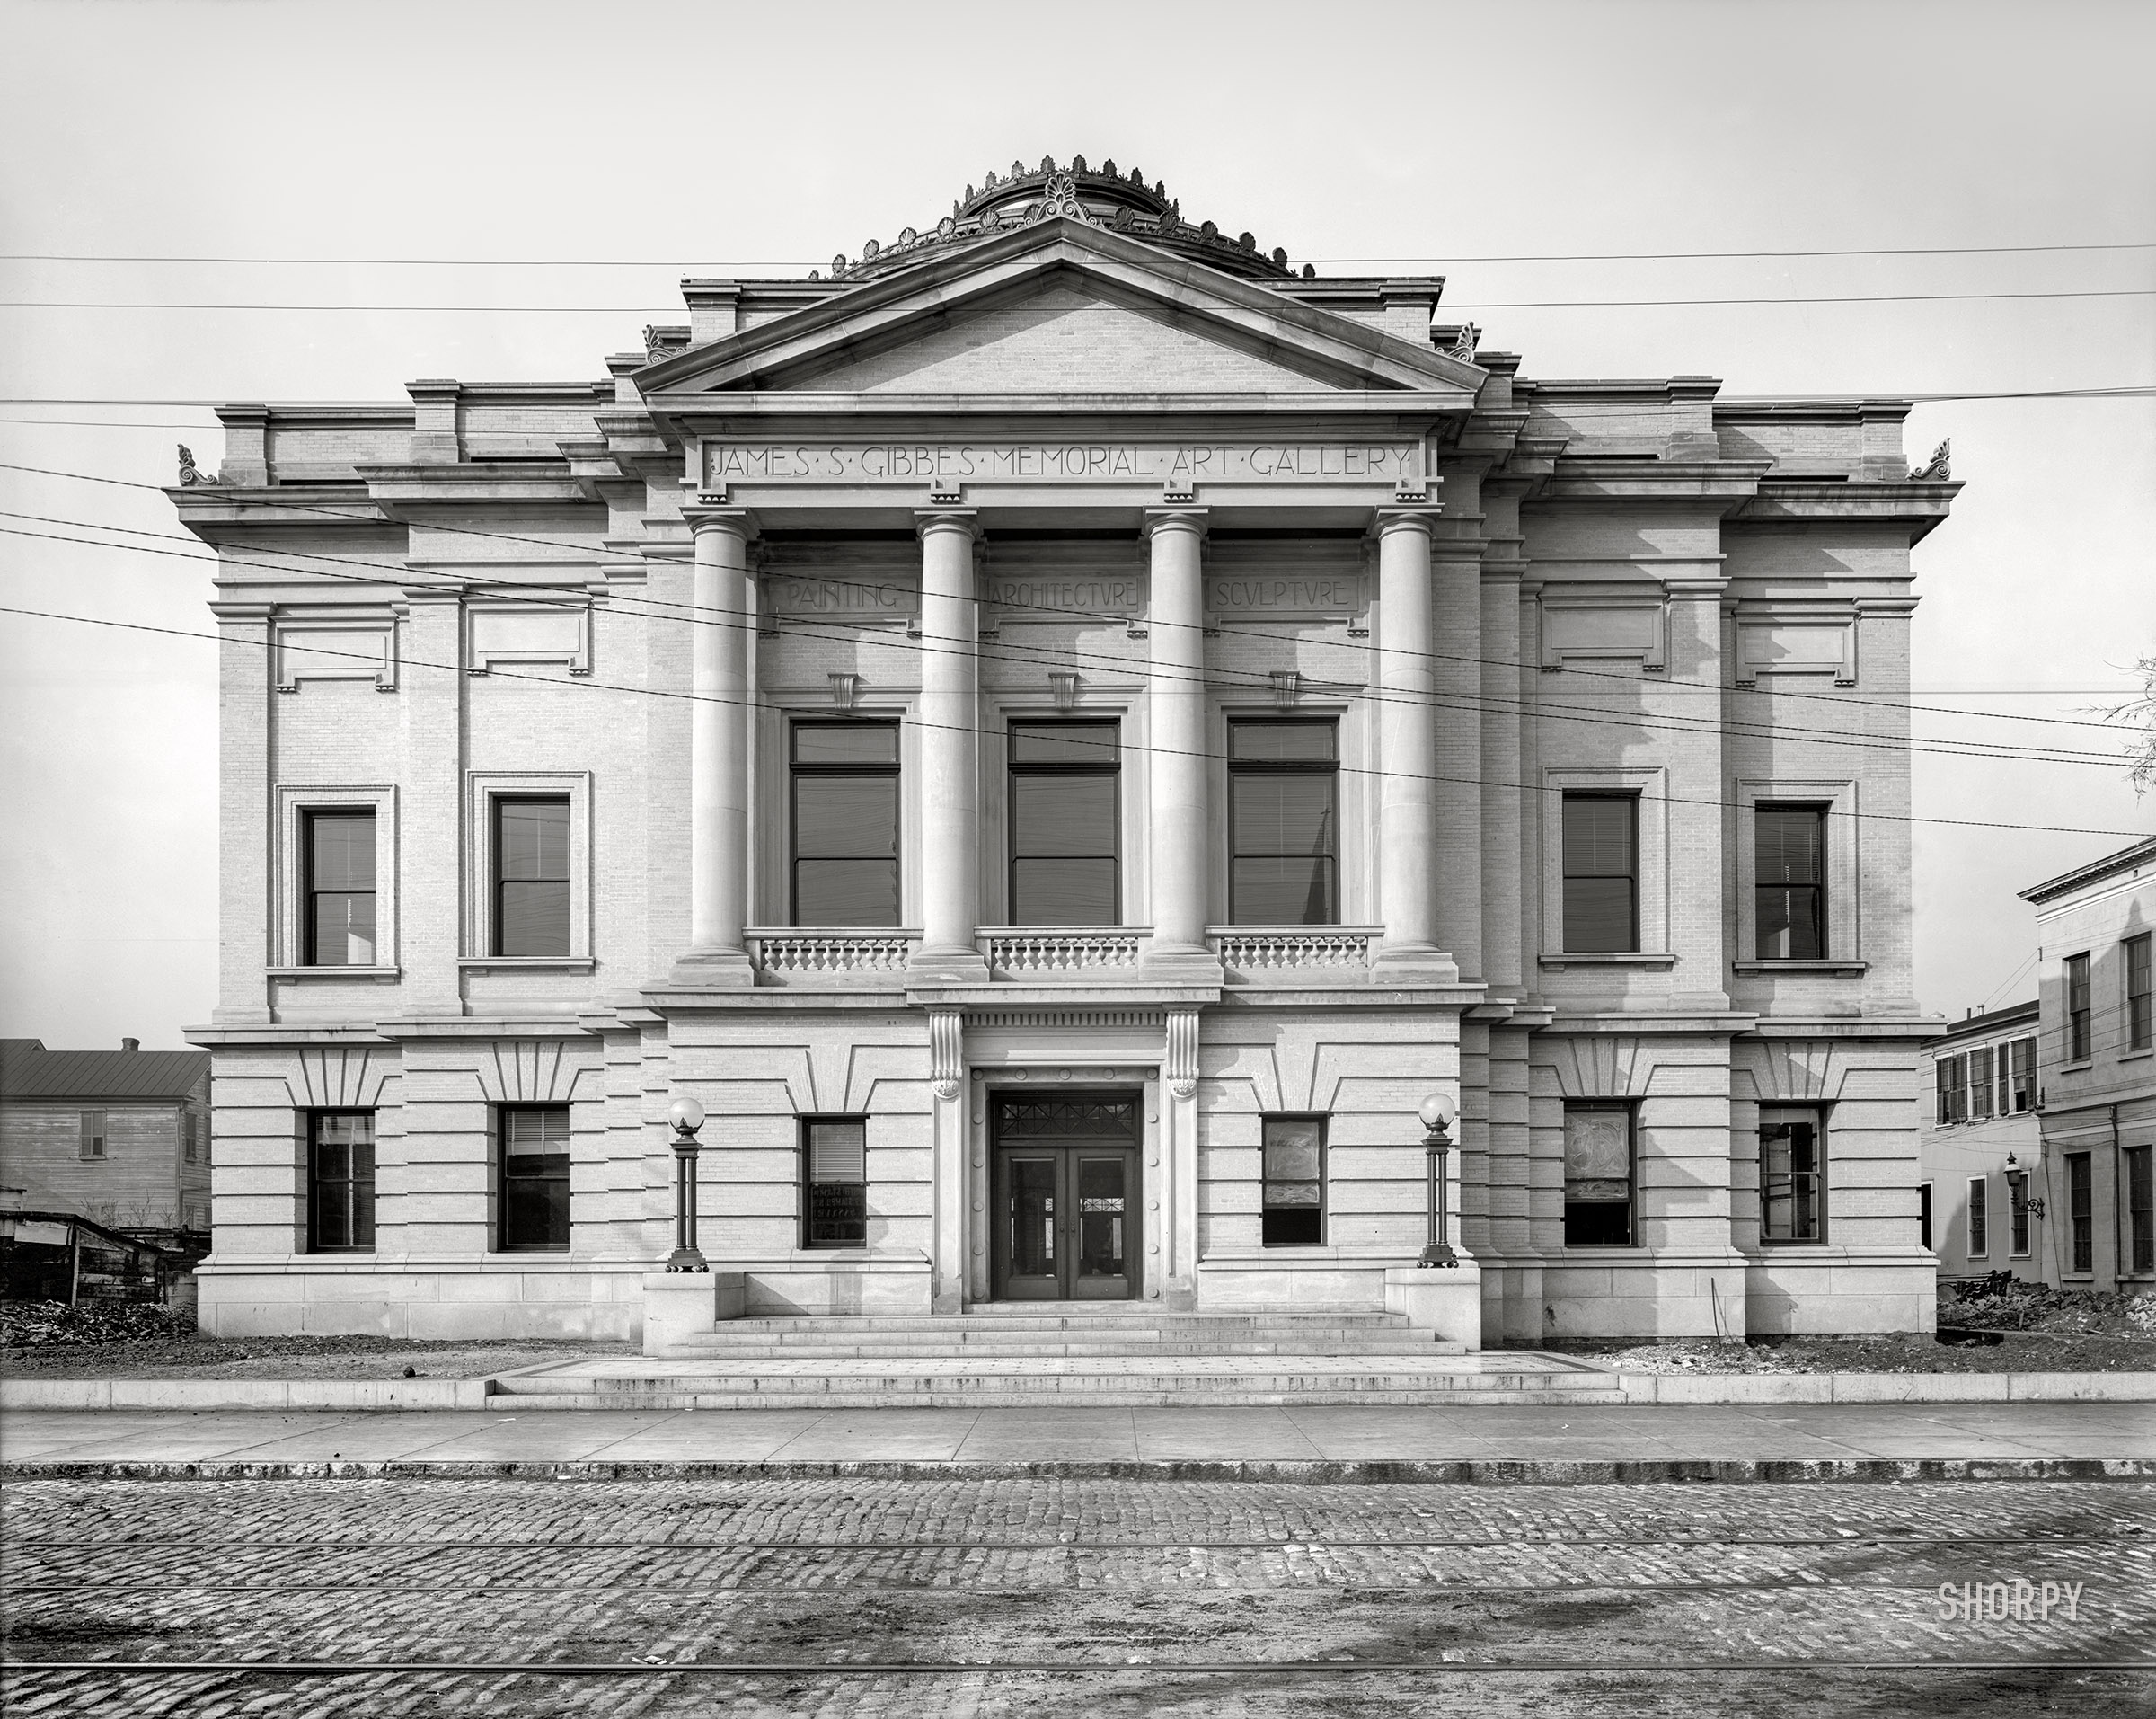 Charleston, South Carolina, 1905. "Gibbes Memorial Art Gallery, Meeting Street." 8x10 inch dry plate glass negative, Detroit Photographic Company. View full size.